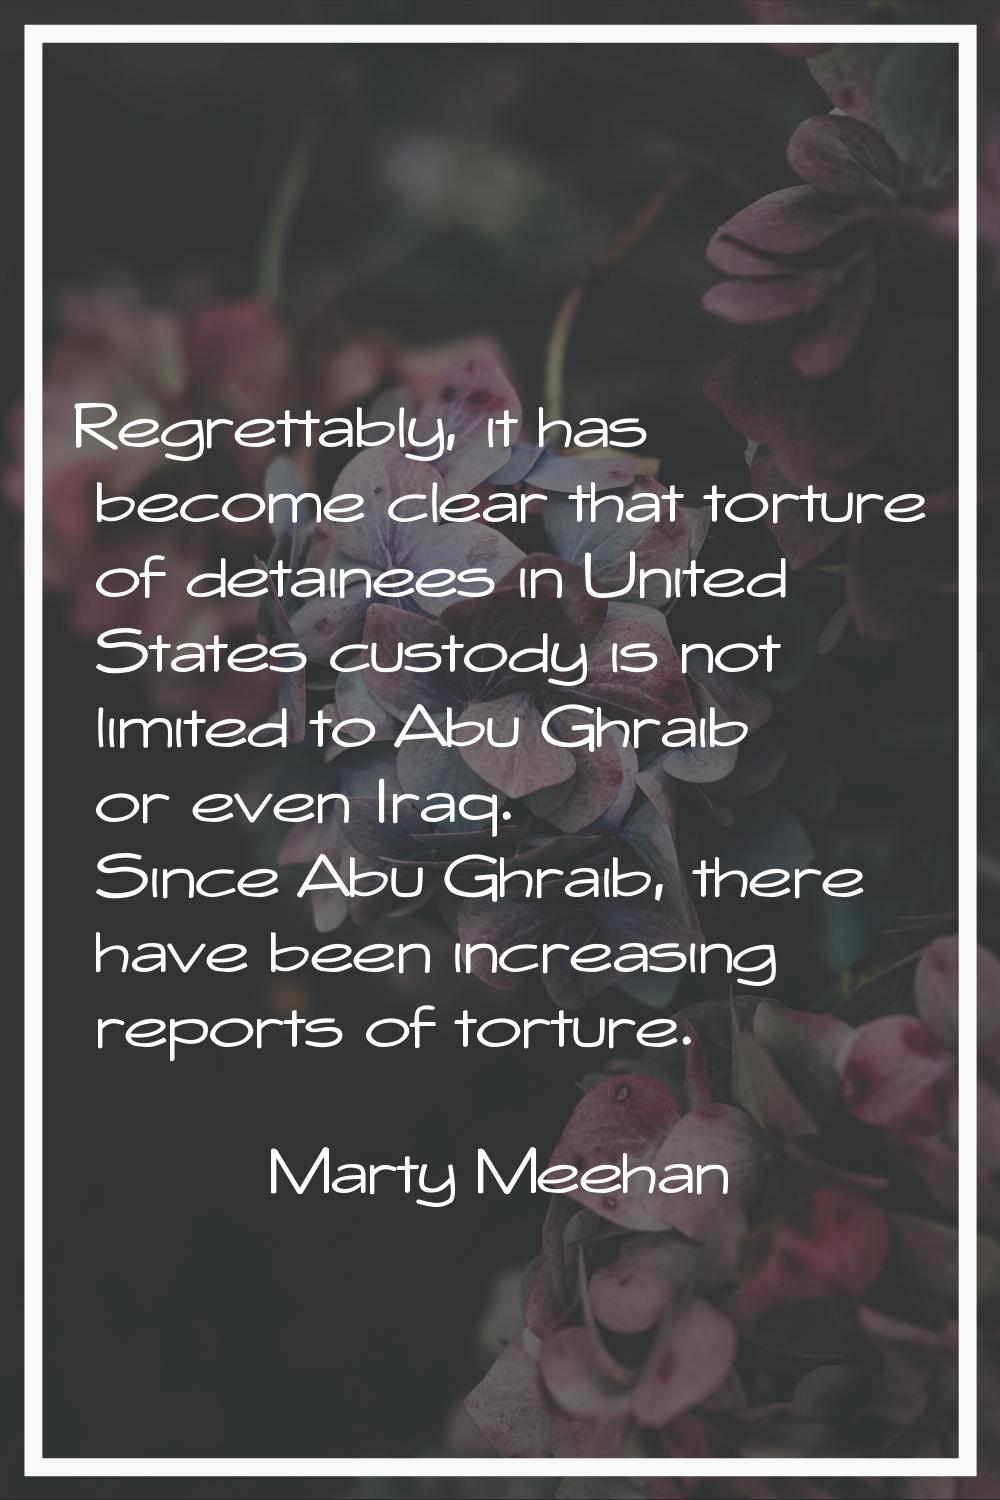 Regrettably, it has become clear that torture of detainees in United States custody is not limited 